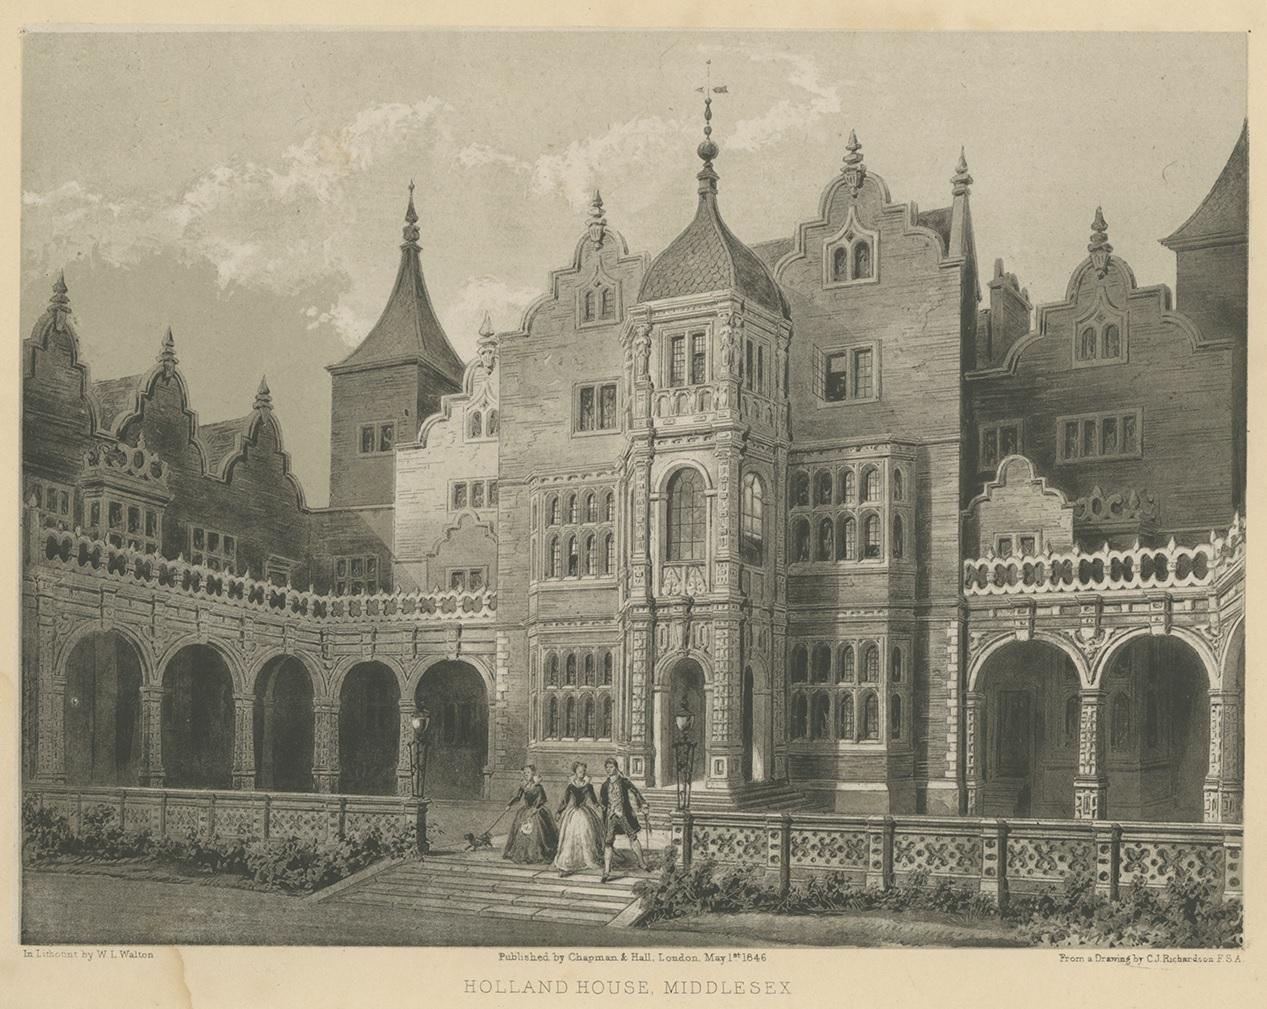 Antique print titled 'Holland House, Middlesex'. View of the Holland House in Middlesex. This print originates from Hall's 'Baronial Halls and Picturesque Edifices of England'.